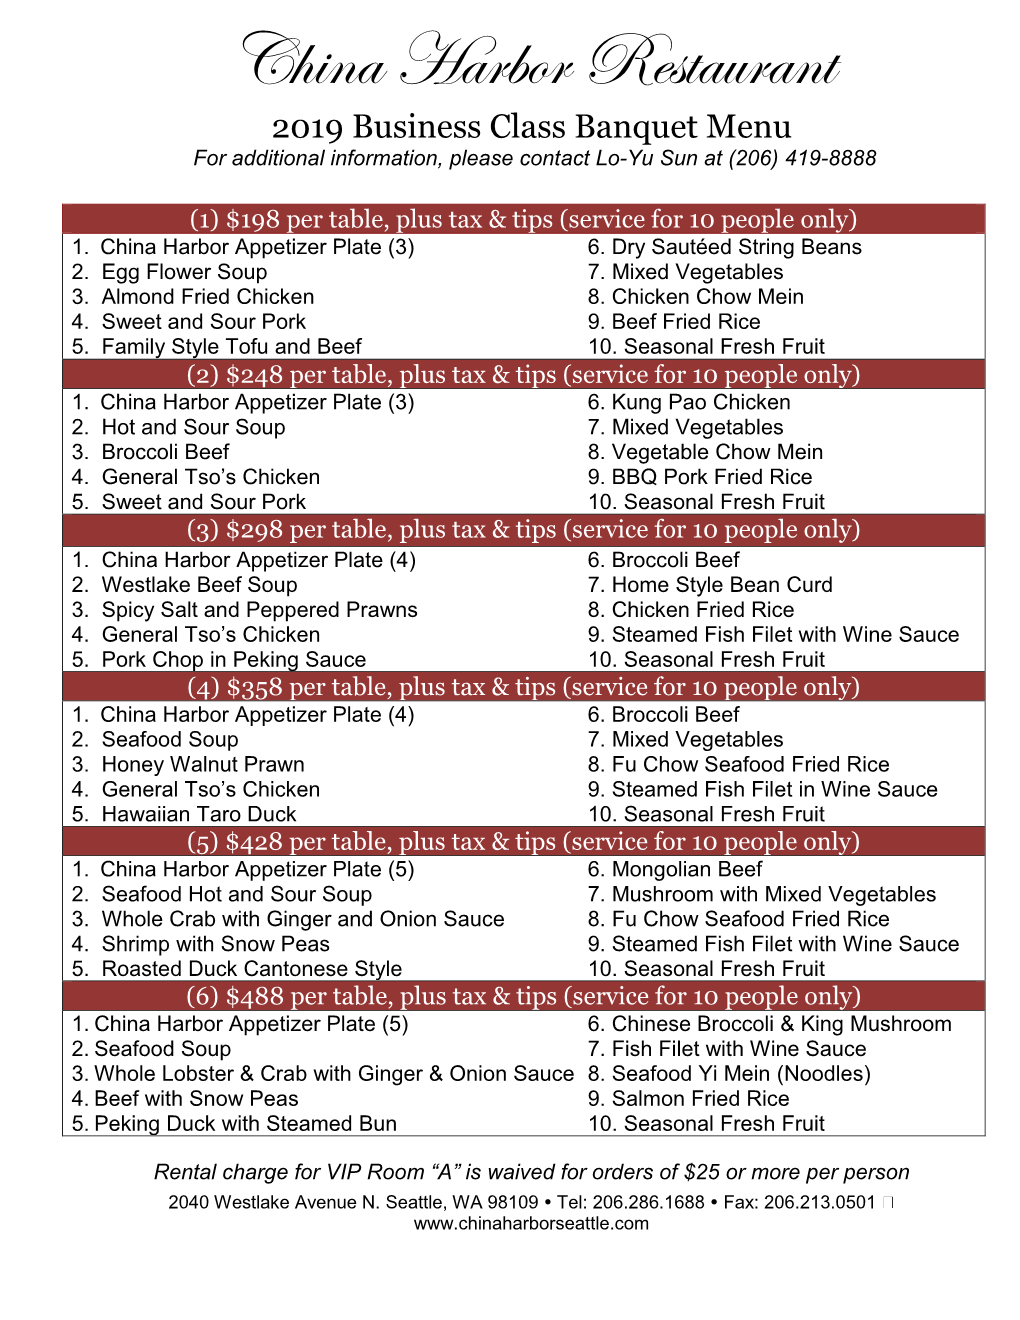 China Harbor Restaurant 2019 Business Class Banquet Menu for Additional Information, Please Contact Lo-Yu Sun at (206) 419-8888